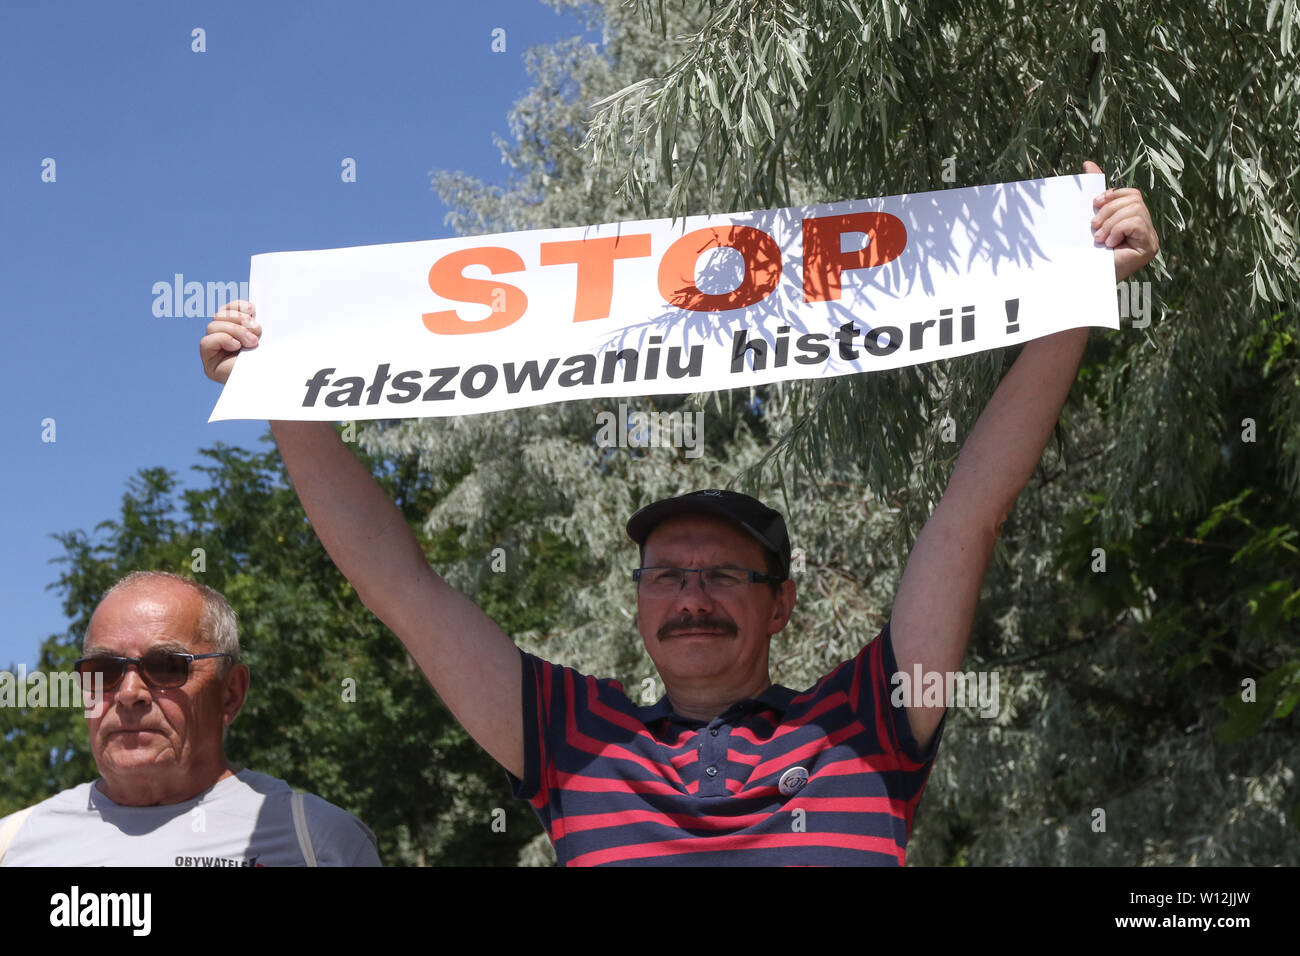 Gdansk, Poland. 29th, June 2019  People and Gdansk city authorities protest against government plans to expropriation for political purposes and the acquisition by a special law the Westerplatte Peninsula. Westerplatte is the first battlefield of the WWII. Protesters holding banners that speak - Westerplatte is fighting again and Stop to falsification of history are seen © Vadim Pacajev / Alamy Live News Stock Photo